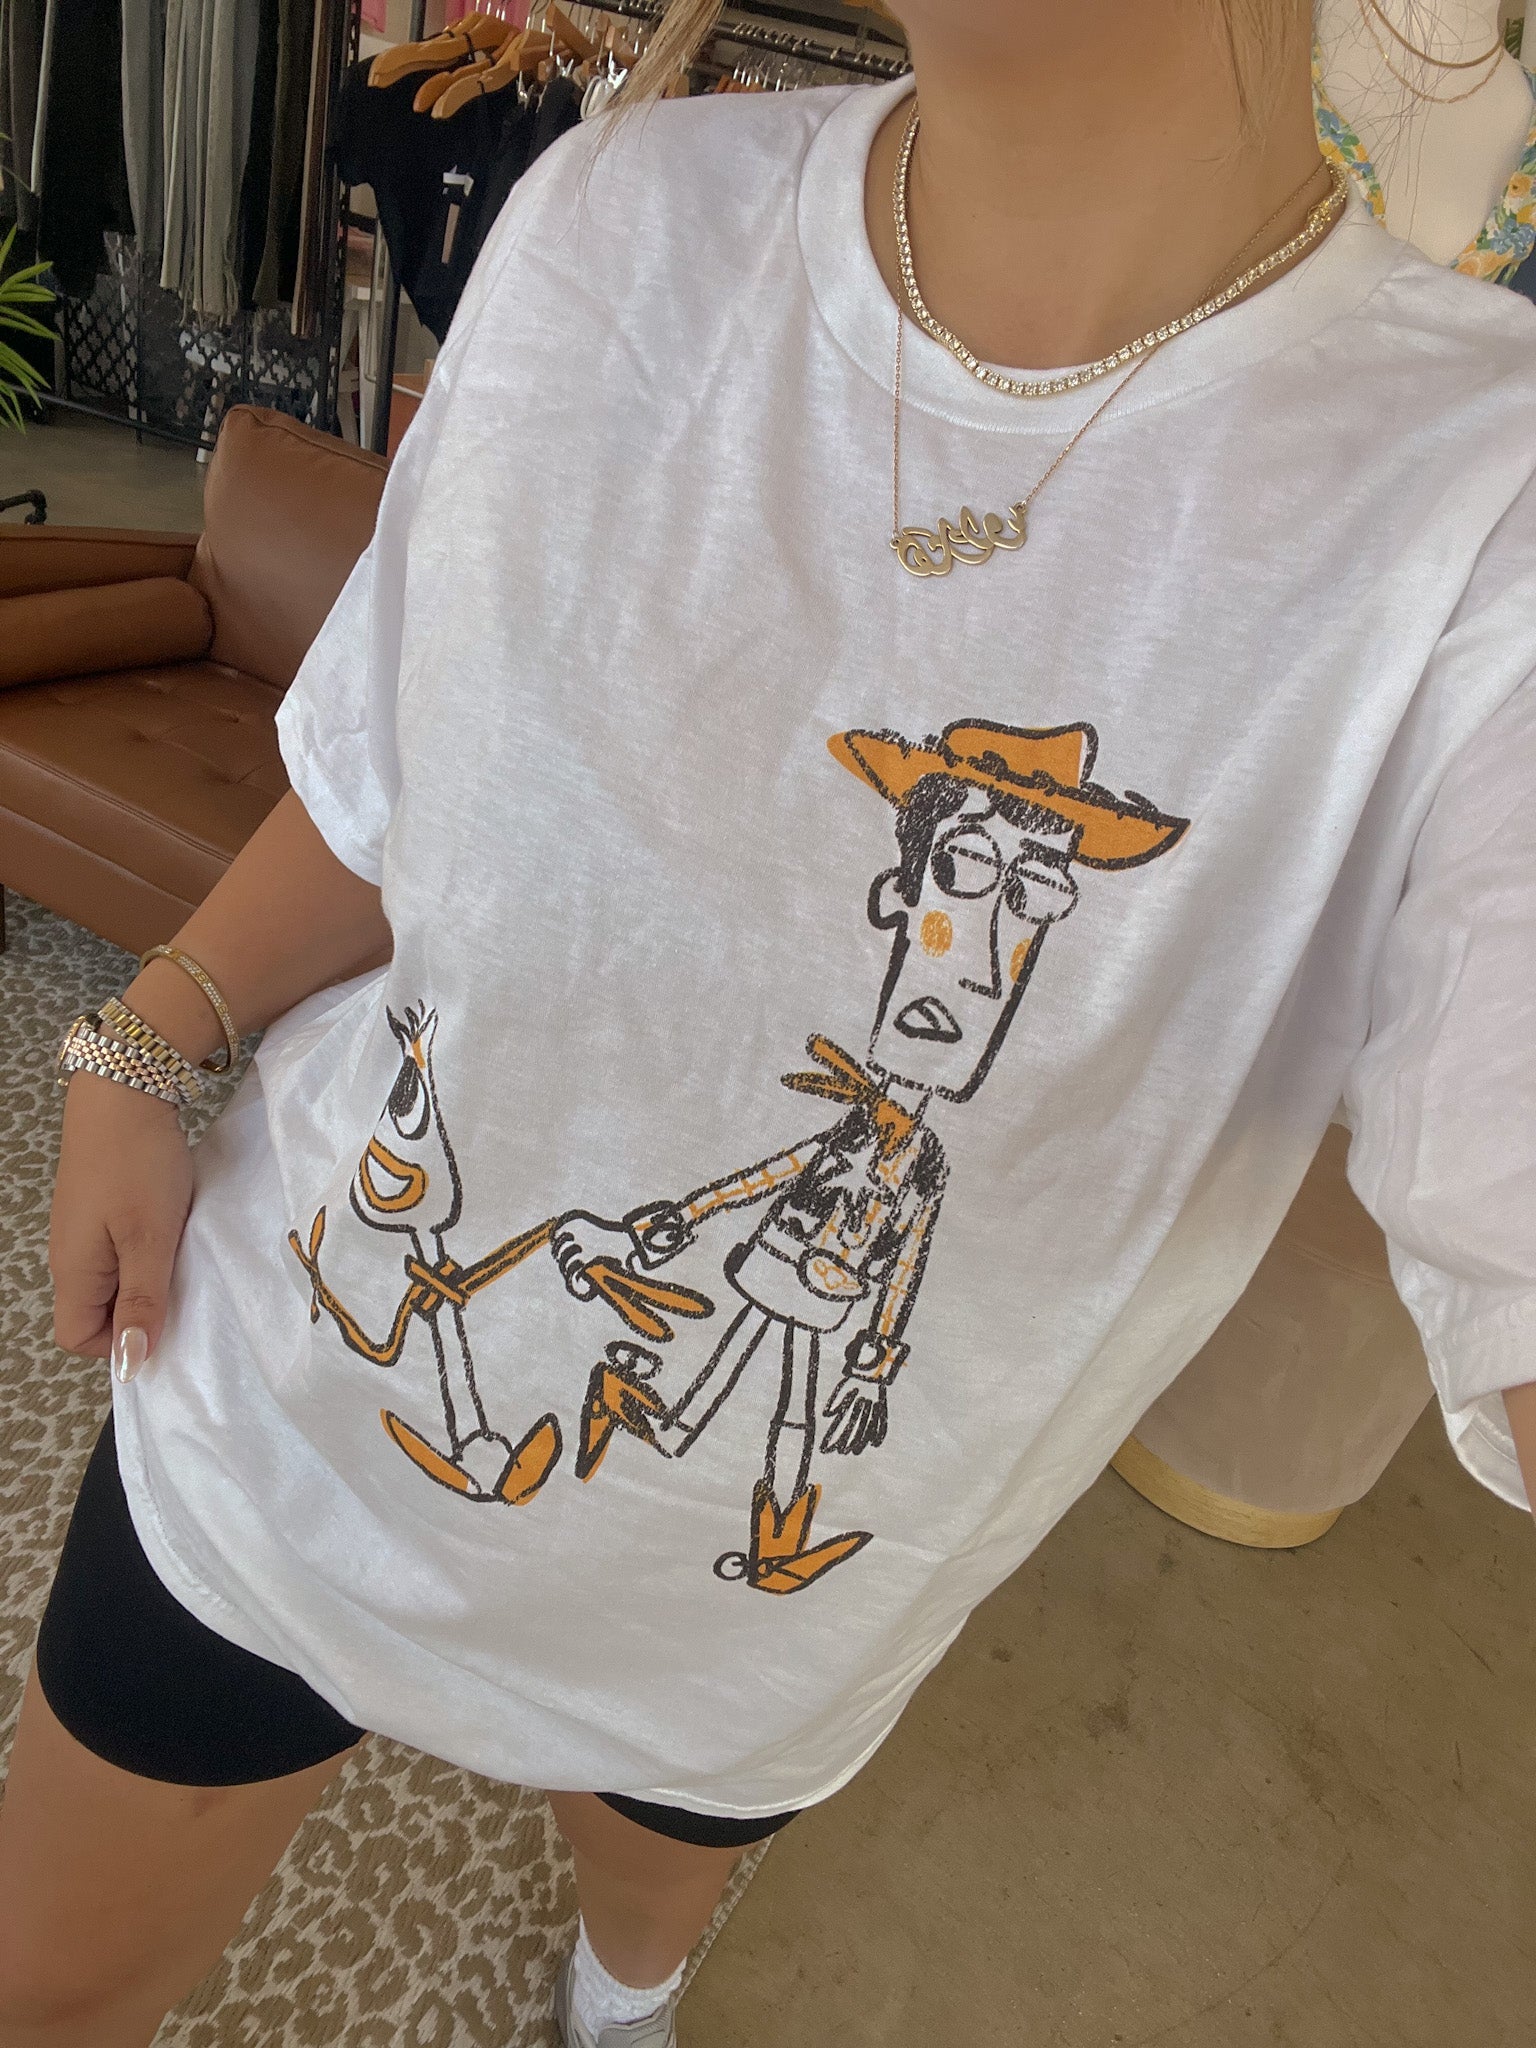 WOODY & FORKY BFF TEE